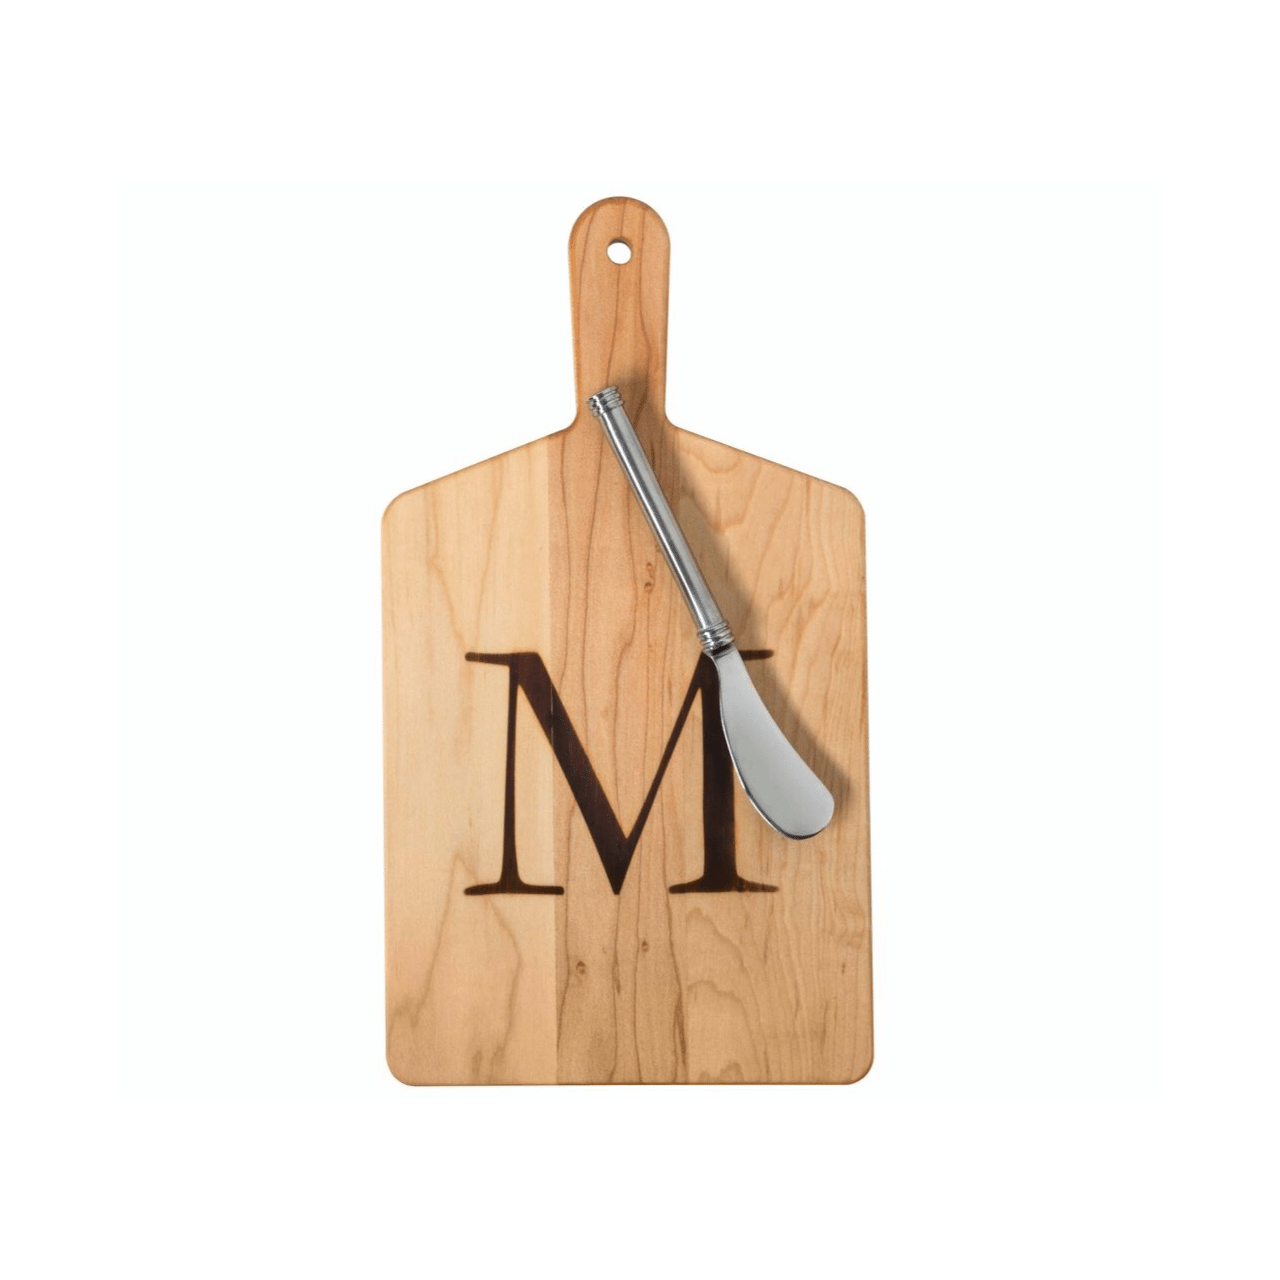 Maple Cheese Board with a Stamped L and Metal Spreader